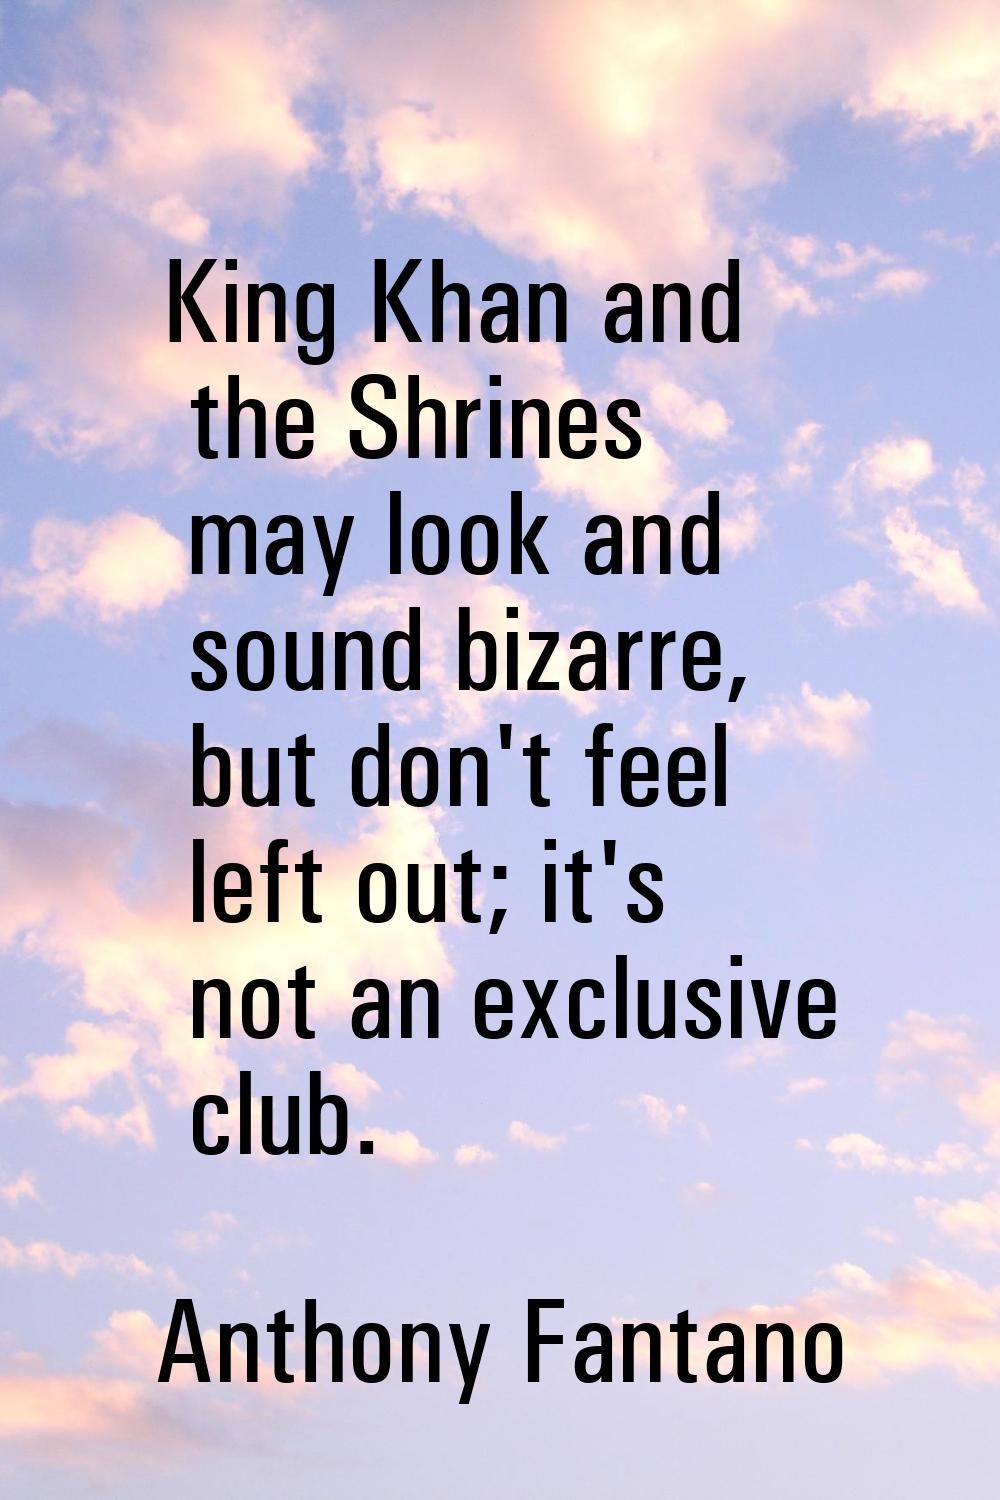 King Khan and the Shrines may look and sound bizarre, but don't feel left out; it's not an exclusiv